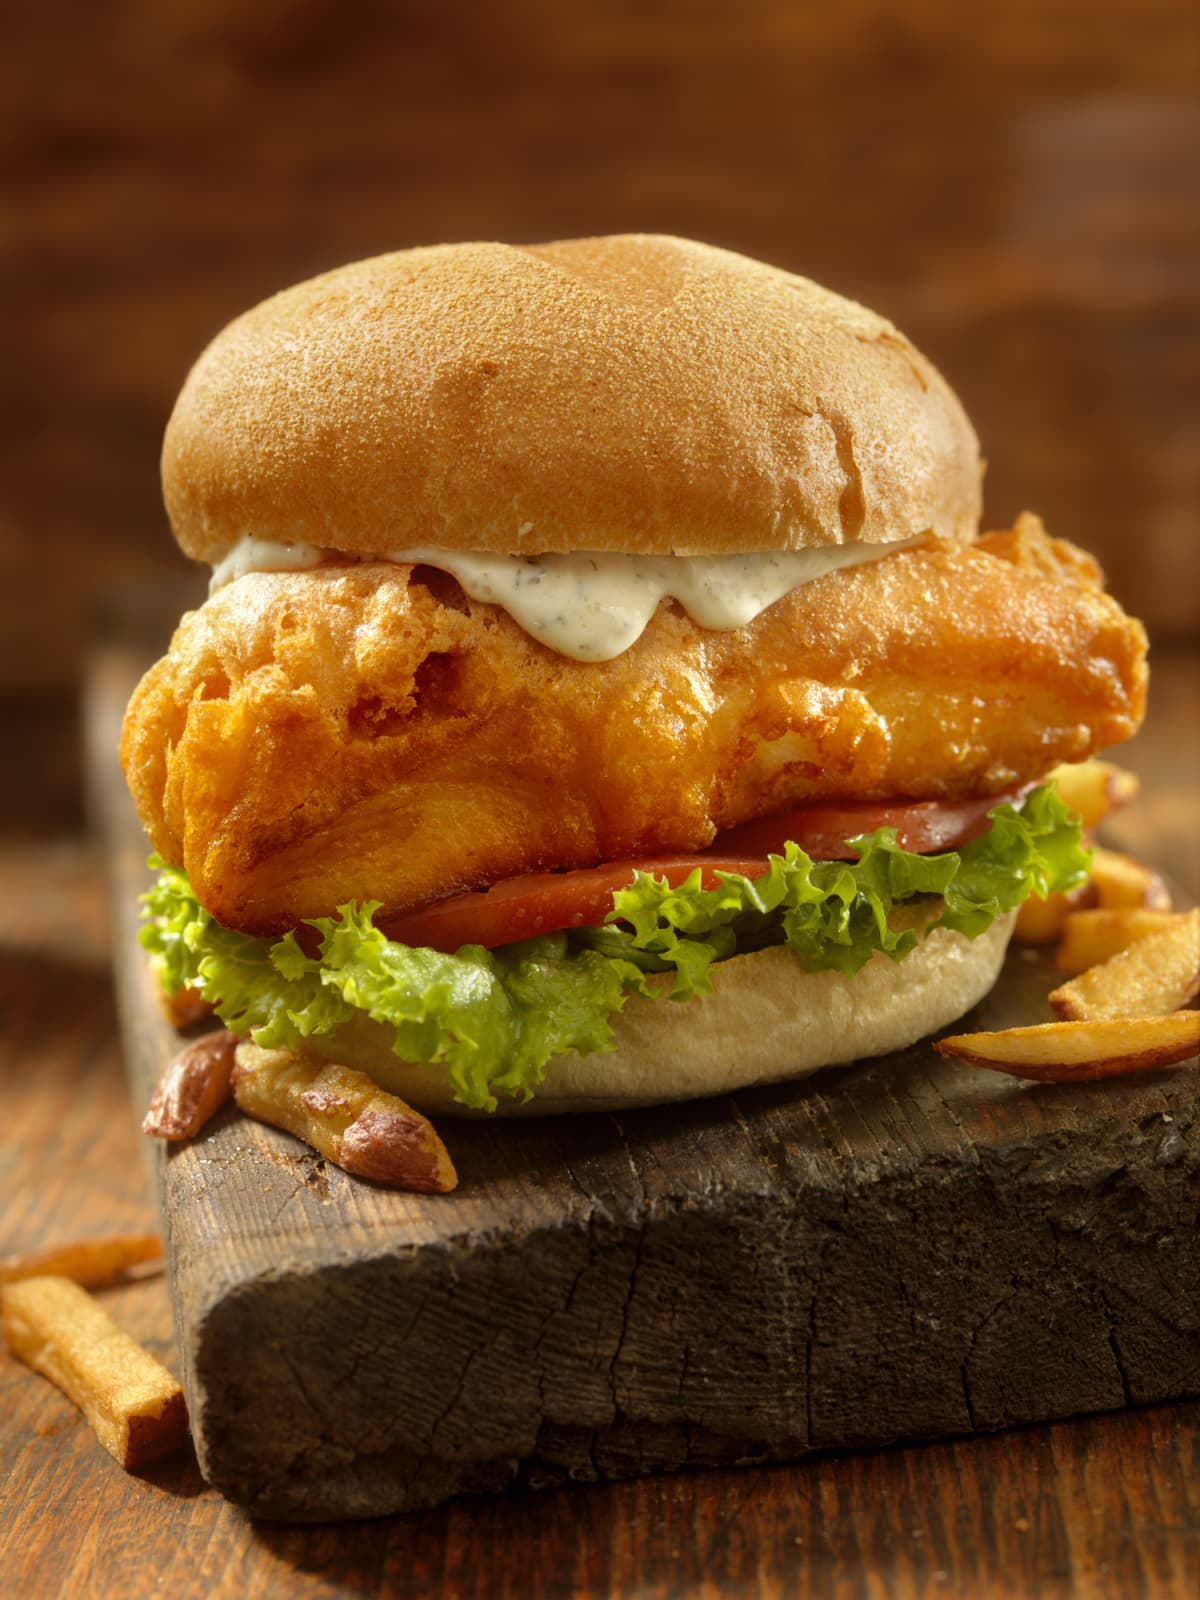 Beer Battered Fish Burger with Fries on a wooden board